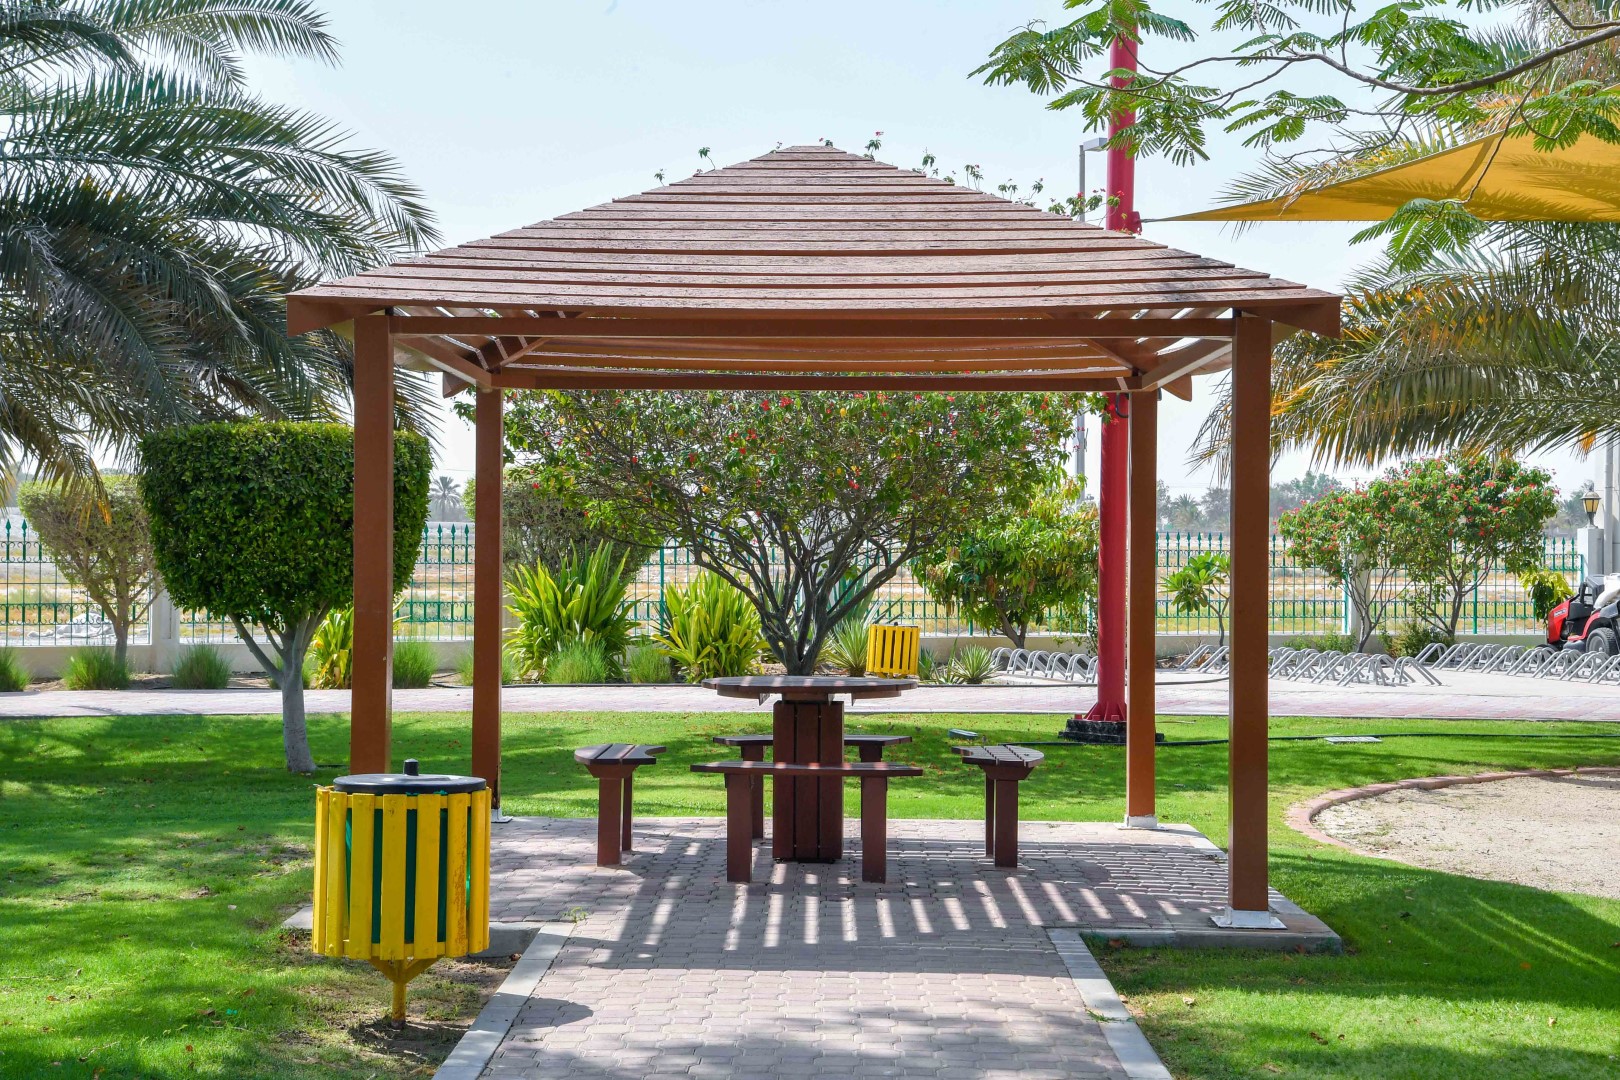 ADM Installs New Coolers, Benches, Tables In Parks, Gardens Of Shahama